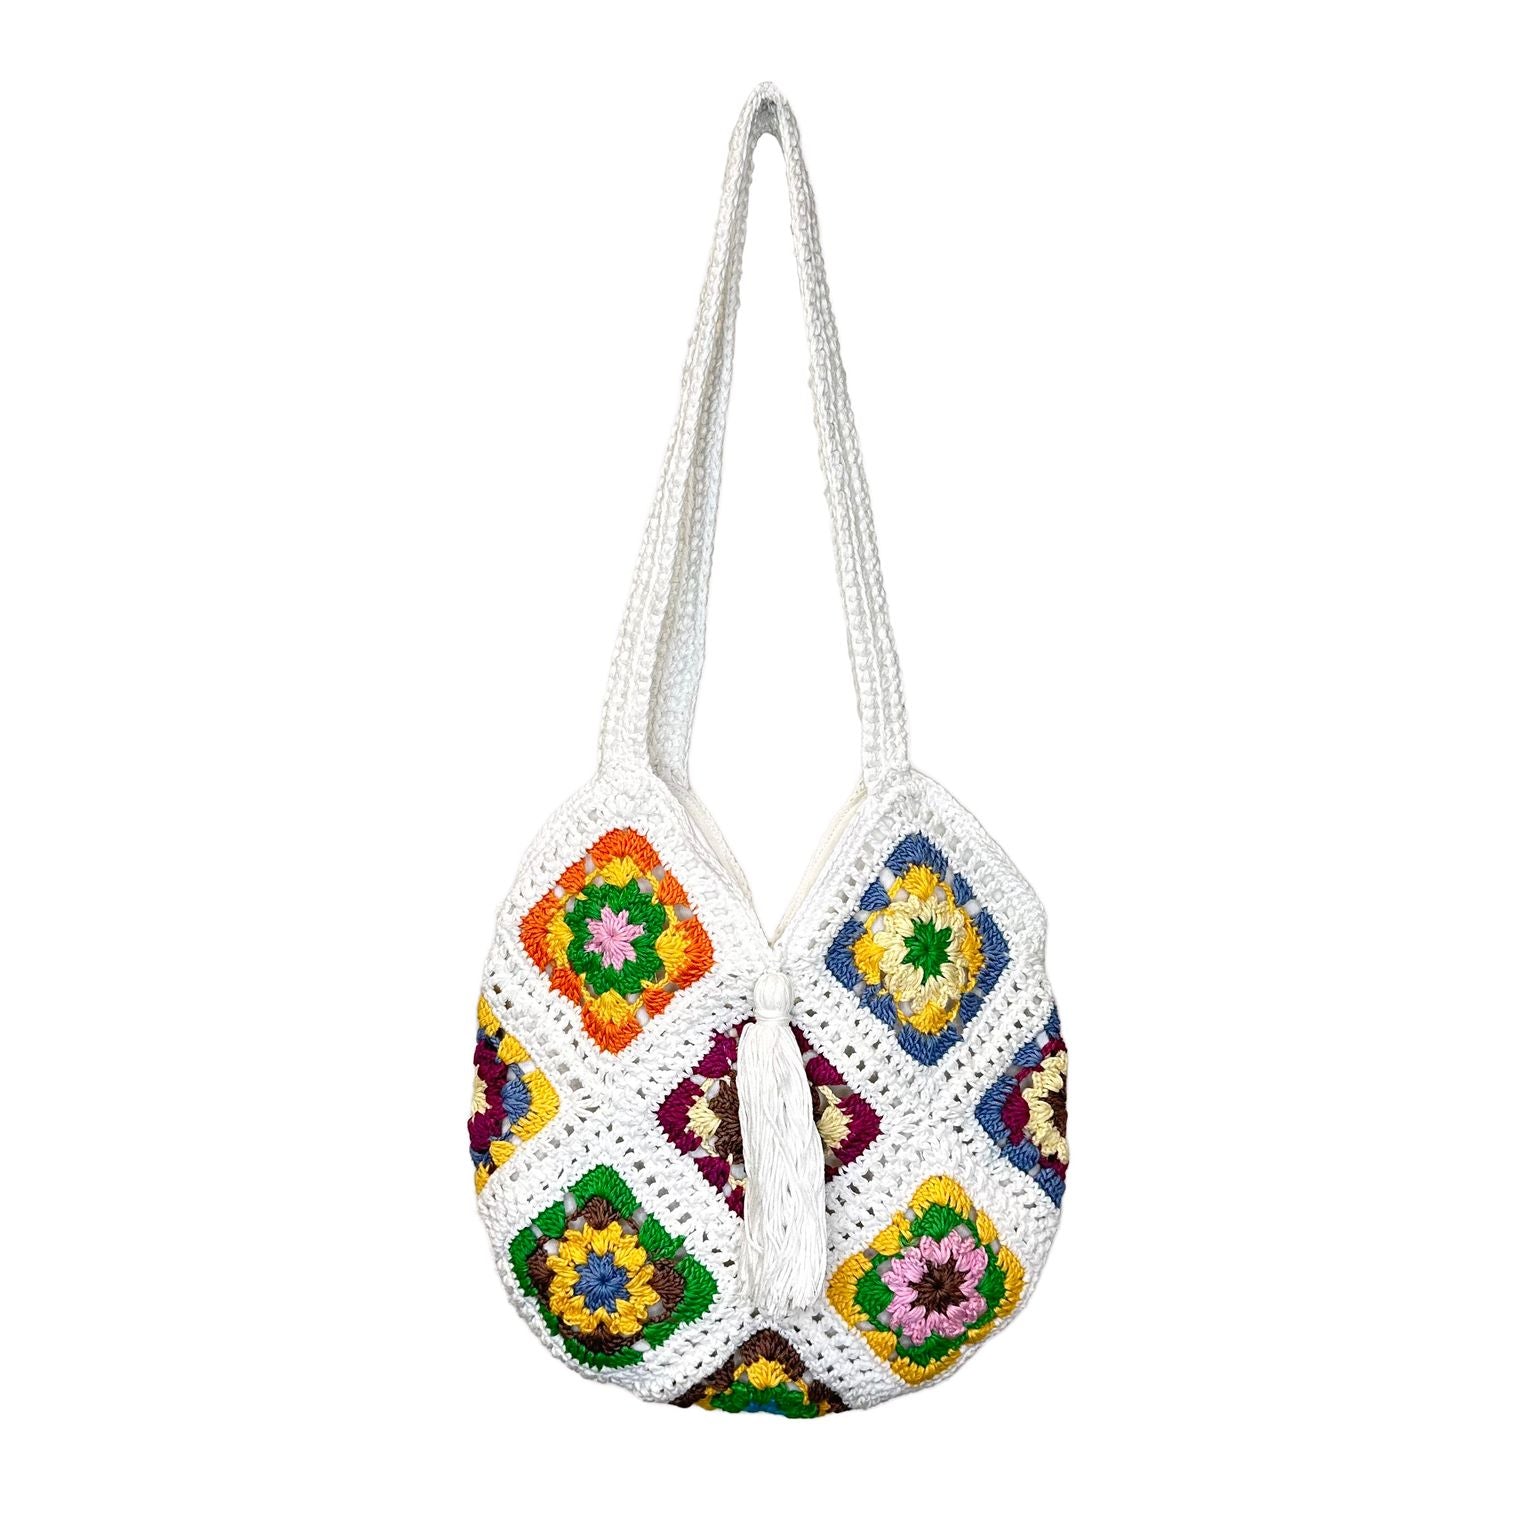 white purse made of colorful crochet granny squares.